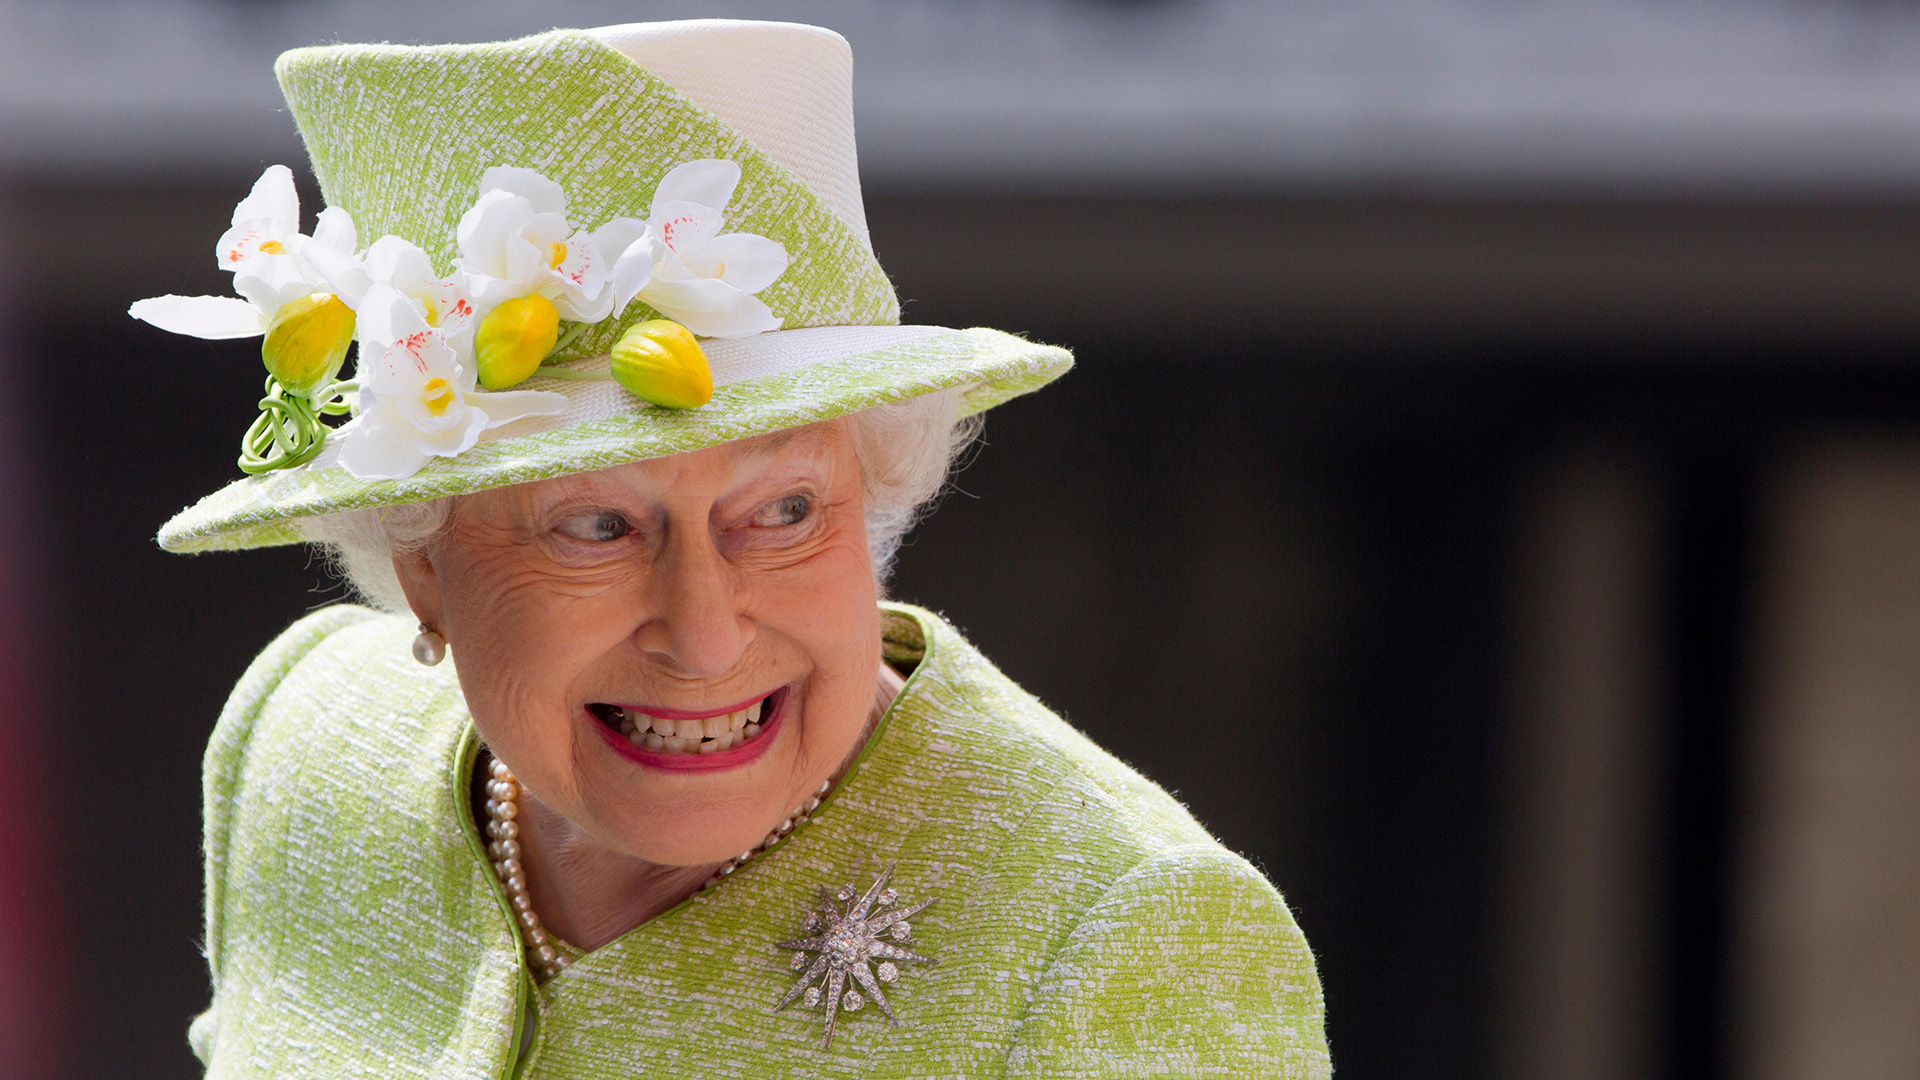 10 Health Tips to Live Past 90 from the Queen